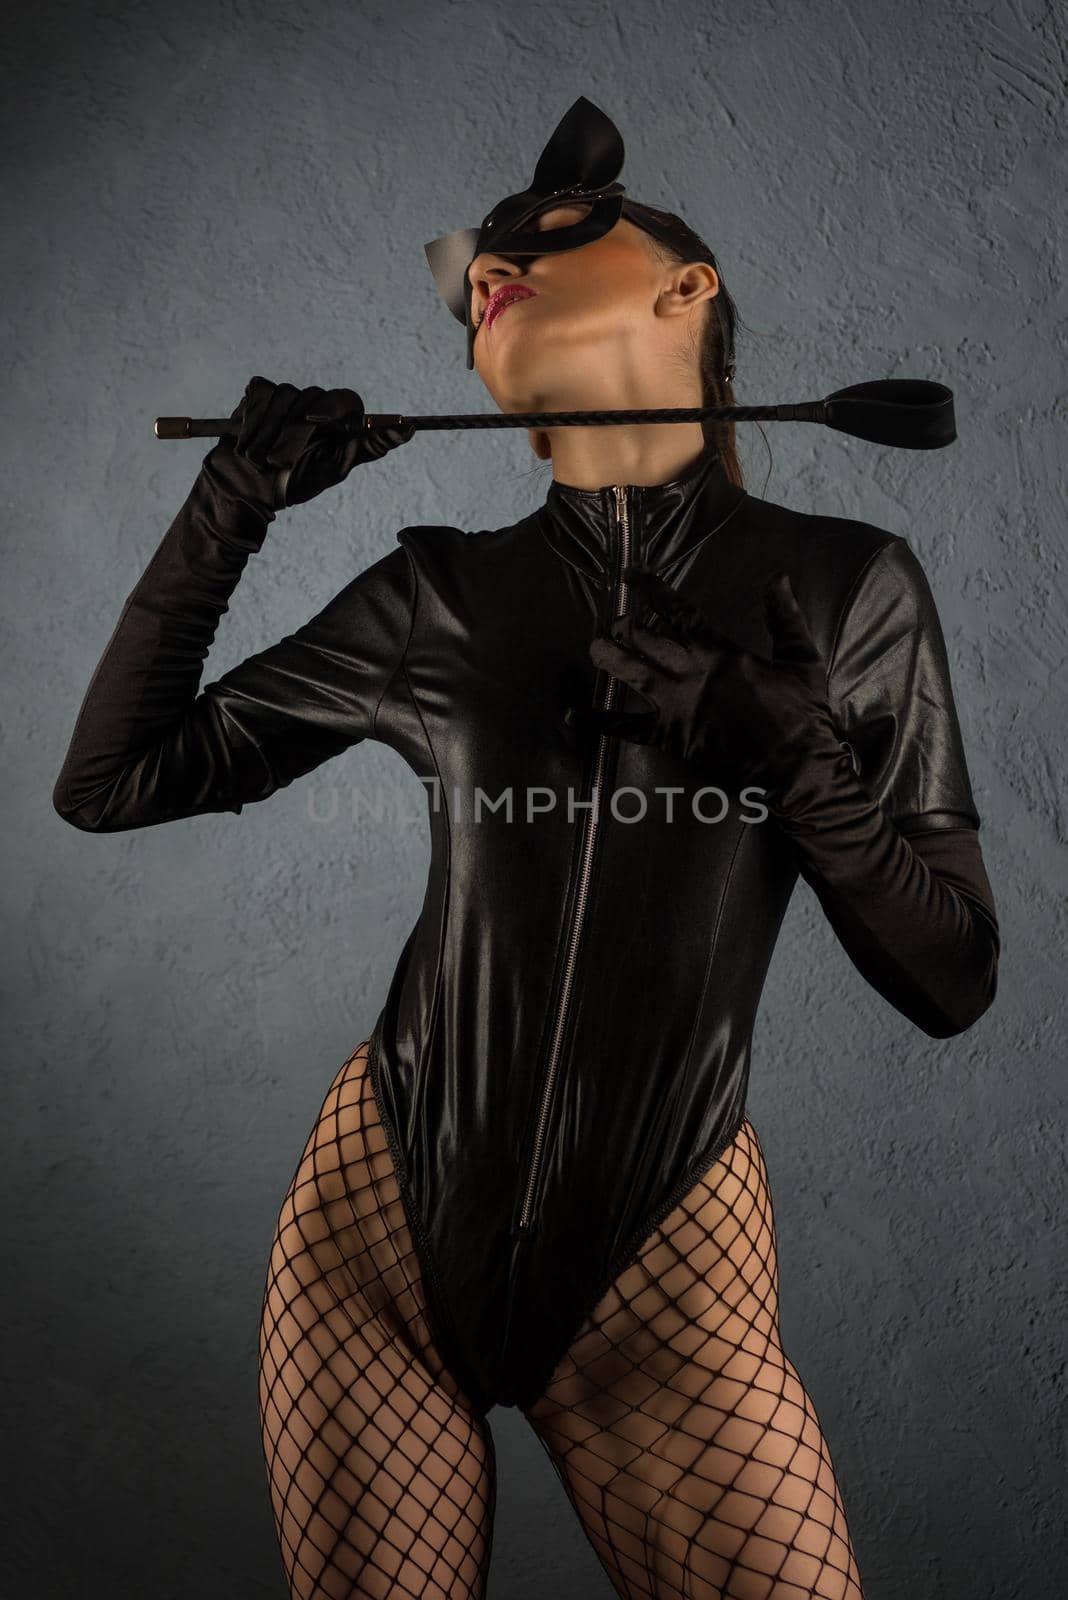 Adult sex games. Beautiful dominant brunette vamp mistress girl in latex body, gloves and bdsm black leather fetish cat mask posing with riding crop. - image